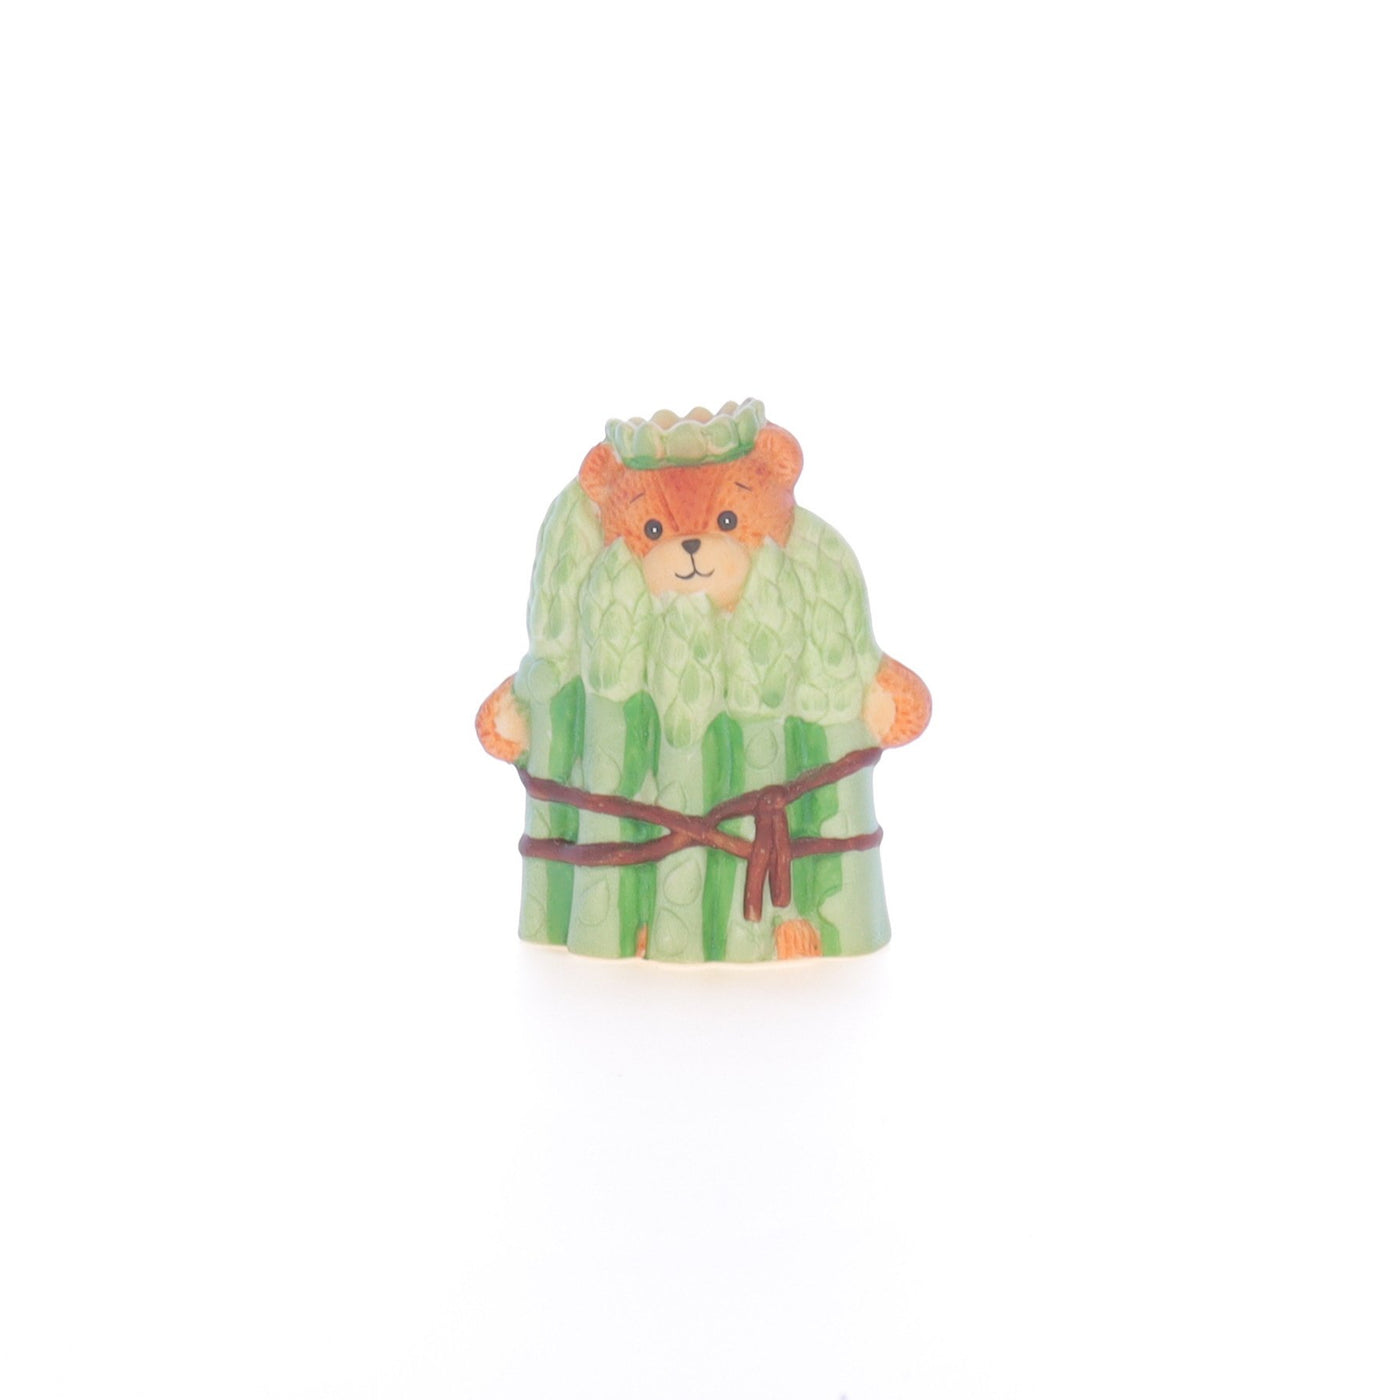 Lucy_And_Me_by_Lucy_Atwell_Porcelain_Figurine_Princess_Bear_in_Asparagus_Costume_Lucy_Unknown_042_01